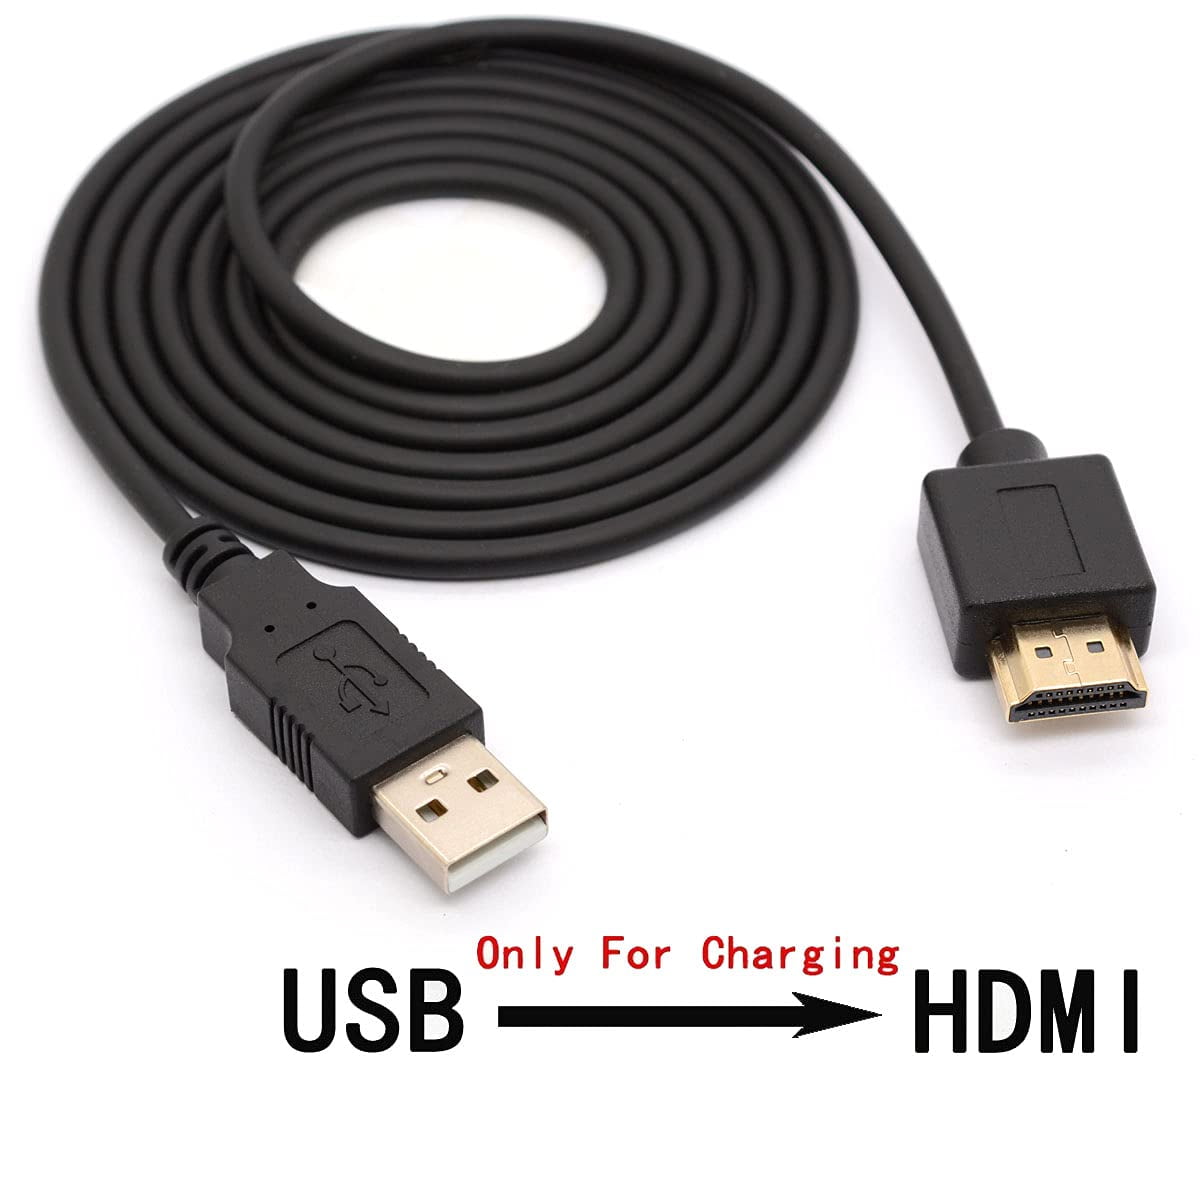 HDMI Adapter Cable Cord - Type A Male to HDMI Male Charging Converter (Only for Charging) (1.5 Meter) - Walmart.com